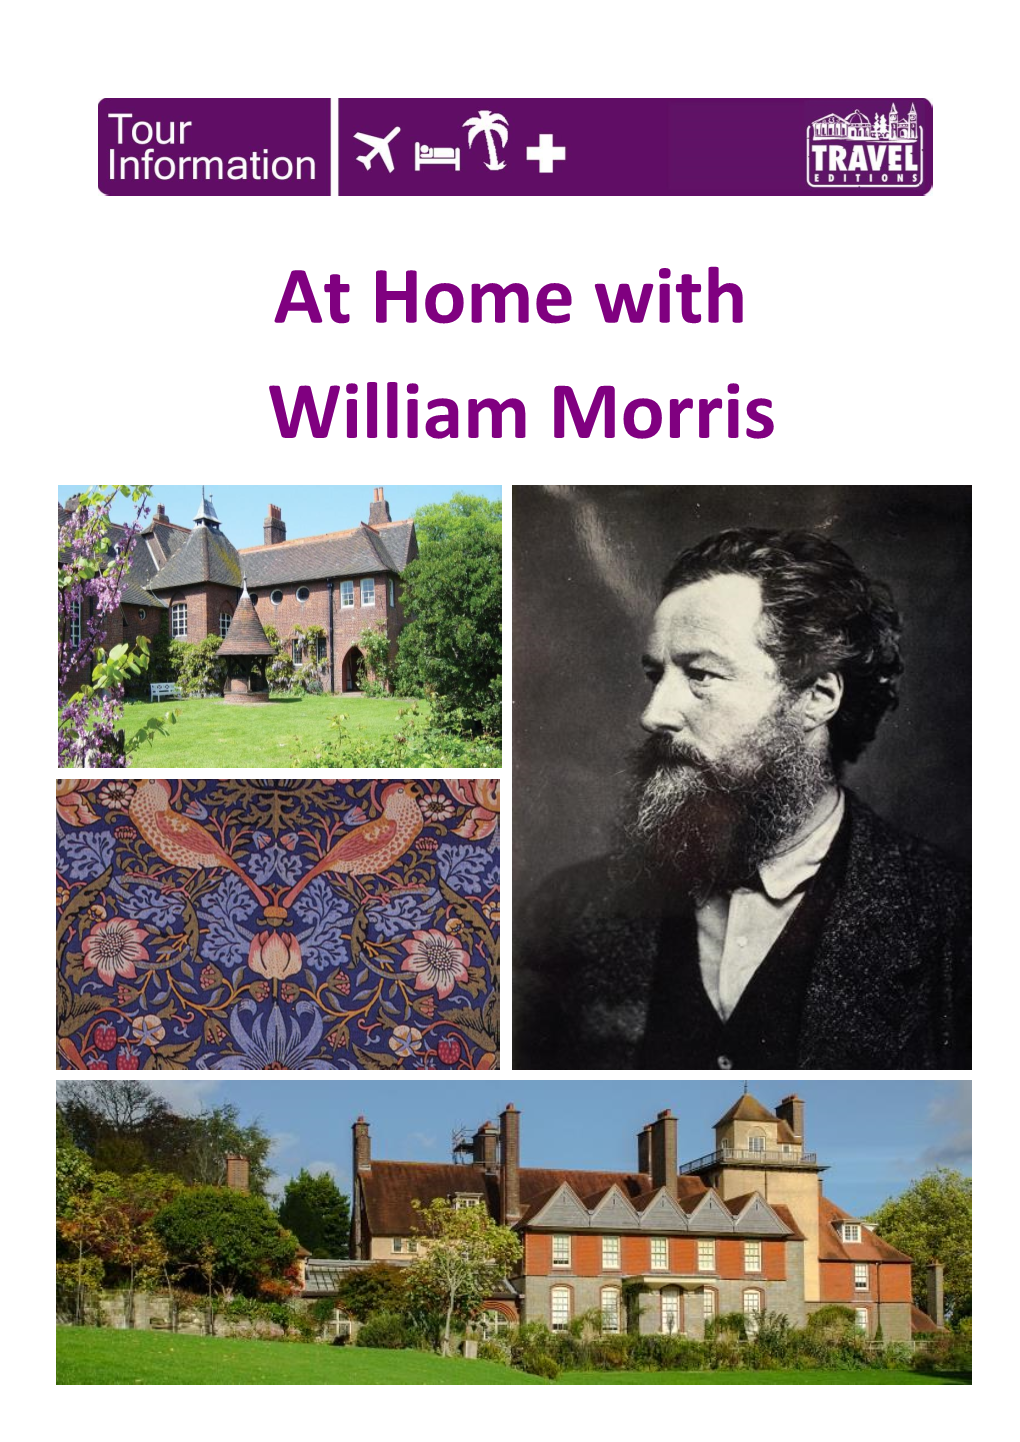 At Home with William Morris